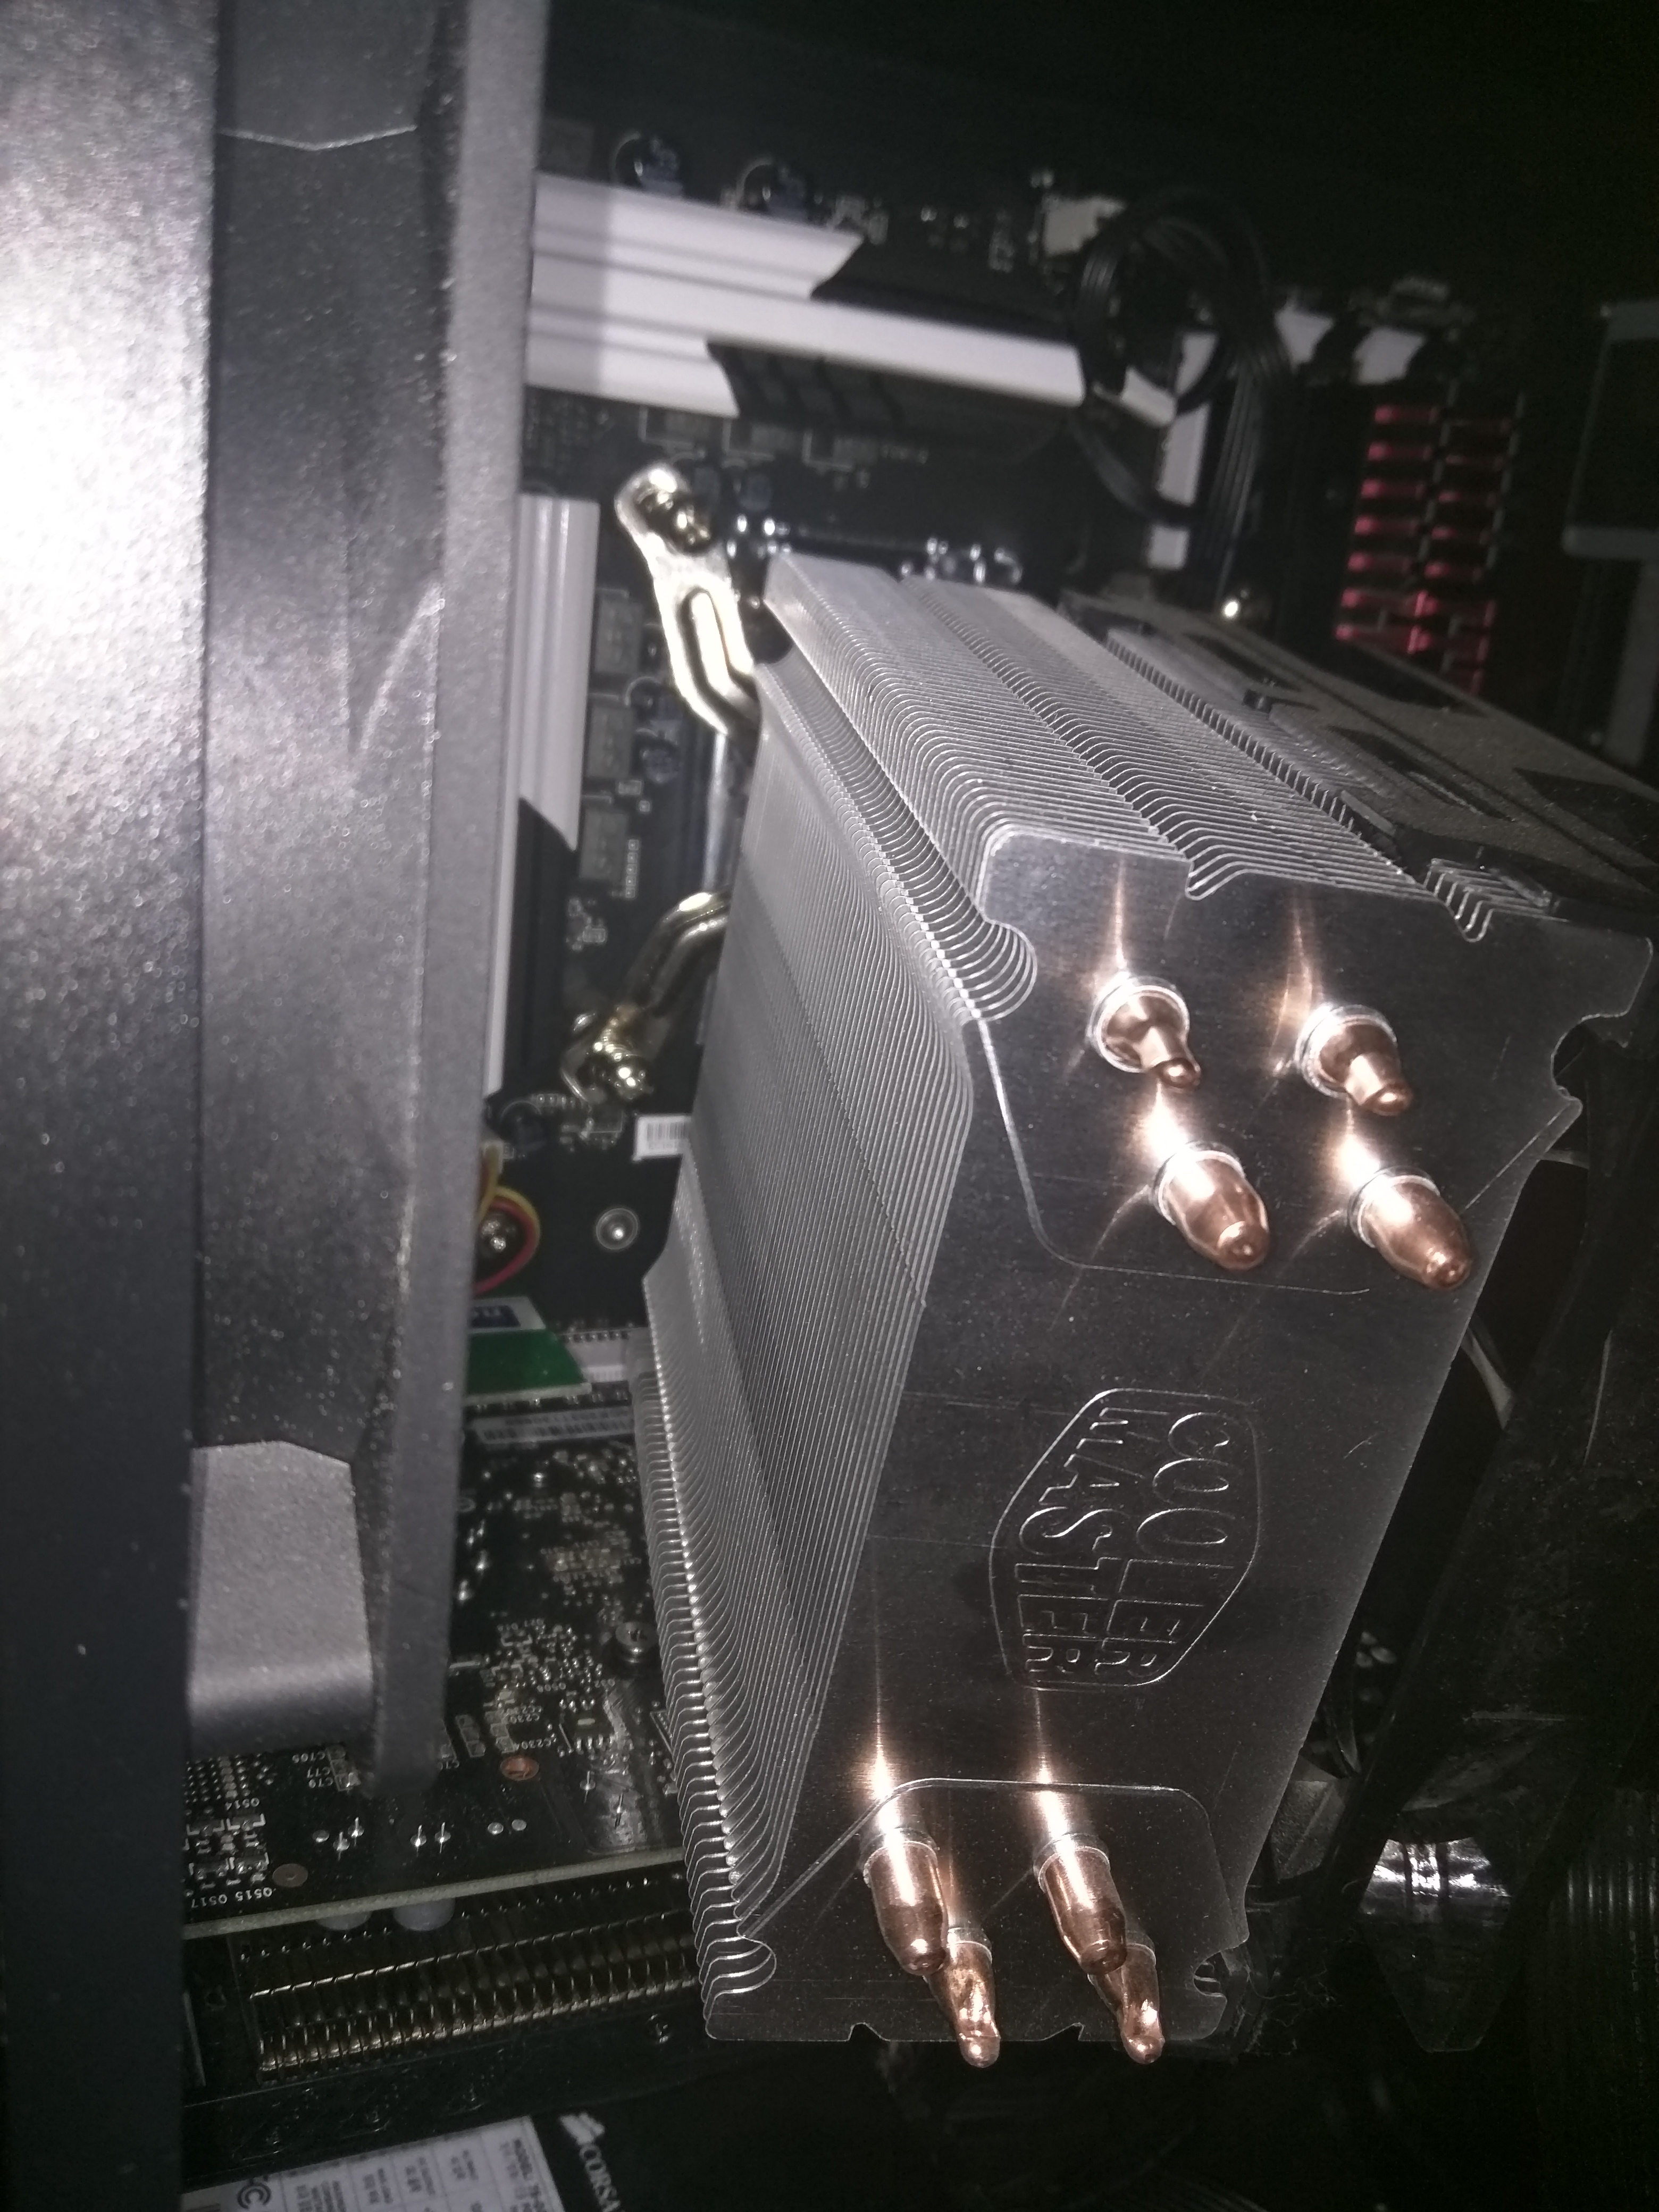 heatsink mostly disconnected & flopping around after the second RMA